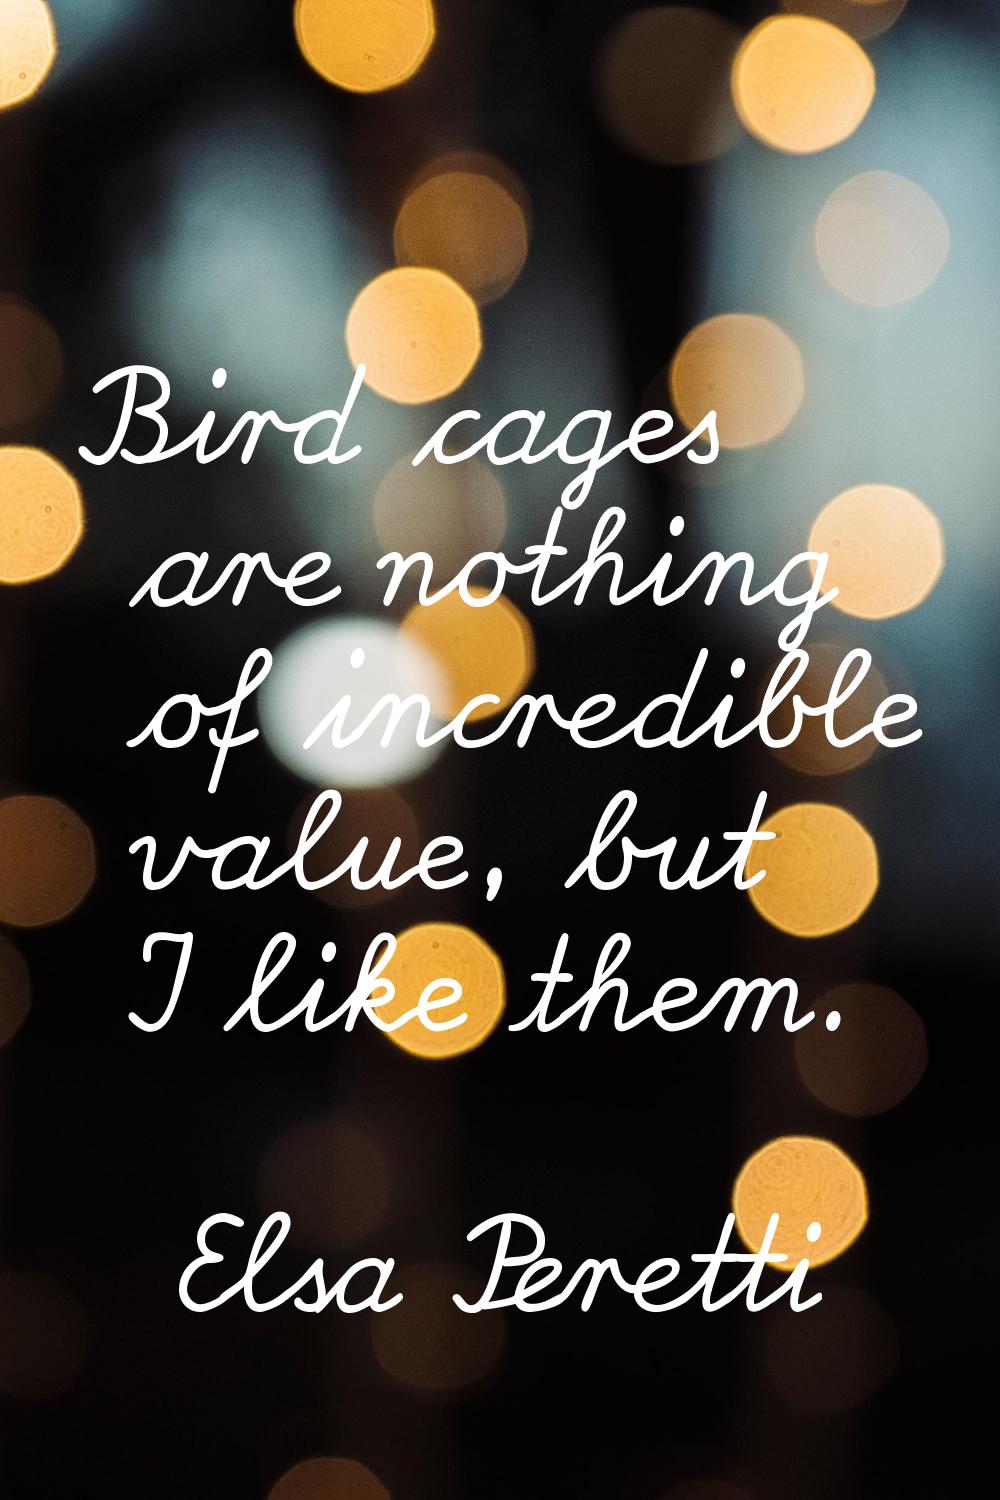 Bird cages are nothing of incredible value, but I like them.